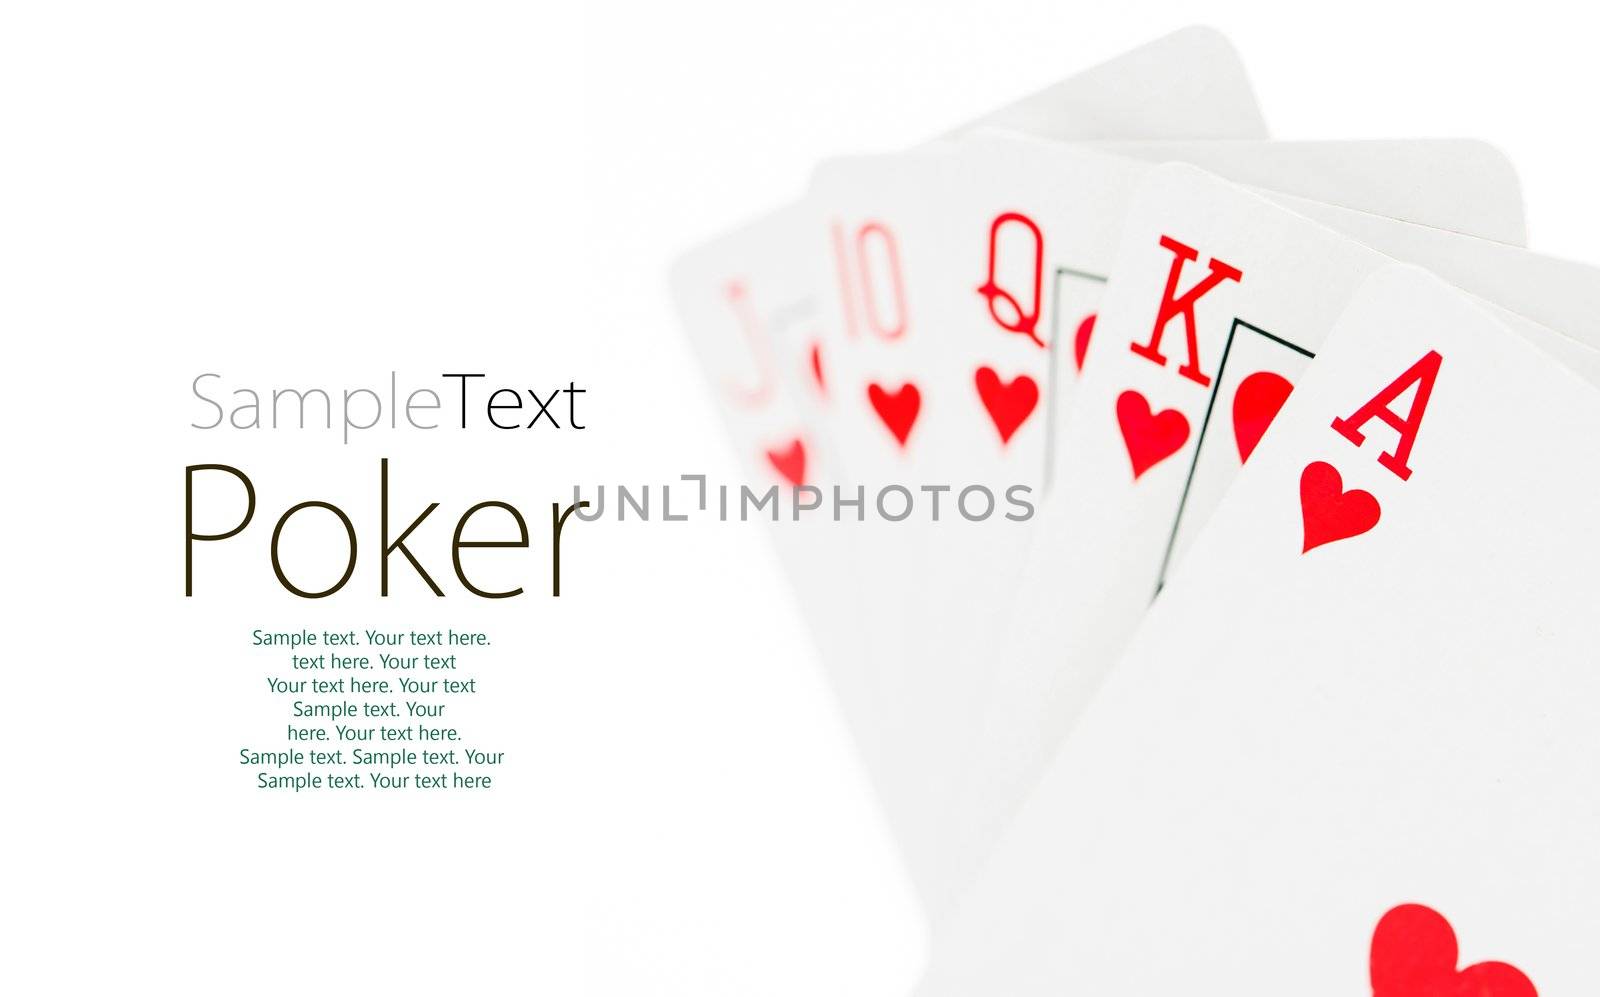 Playing cards - isolated on white background with sample text